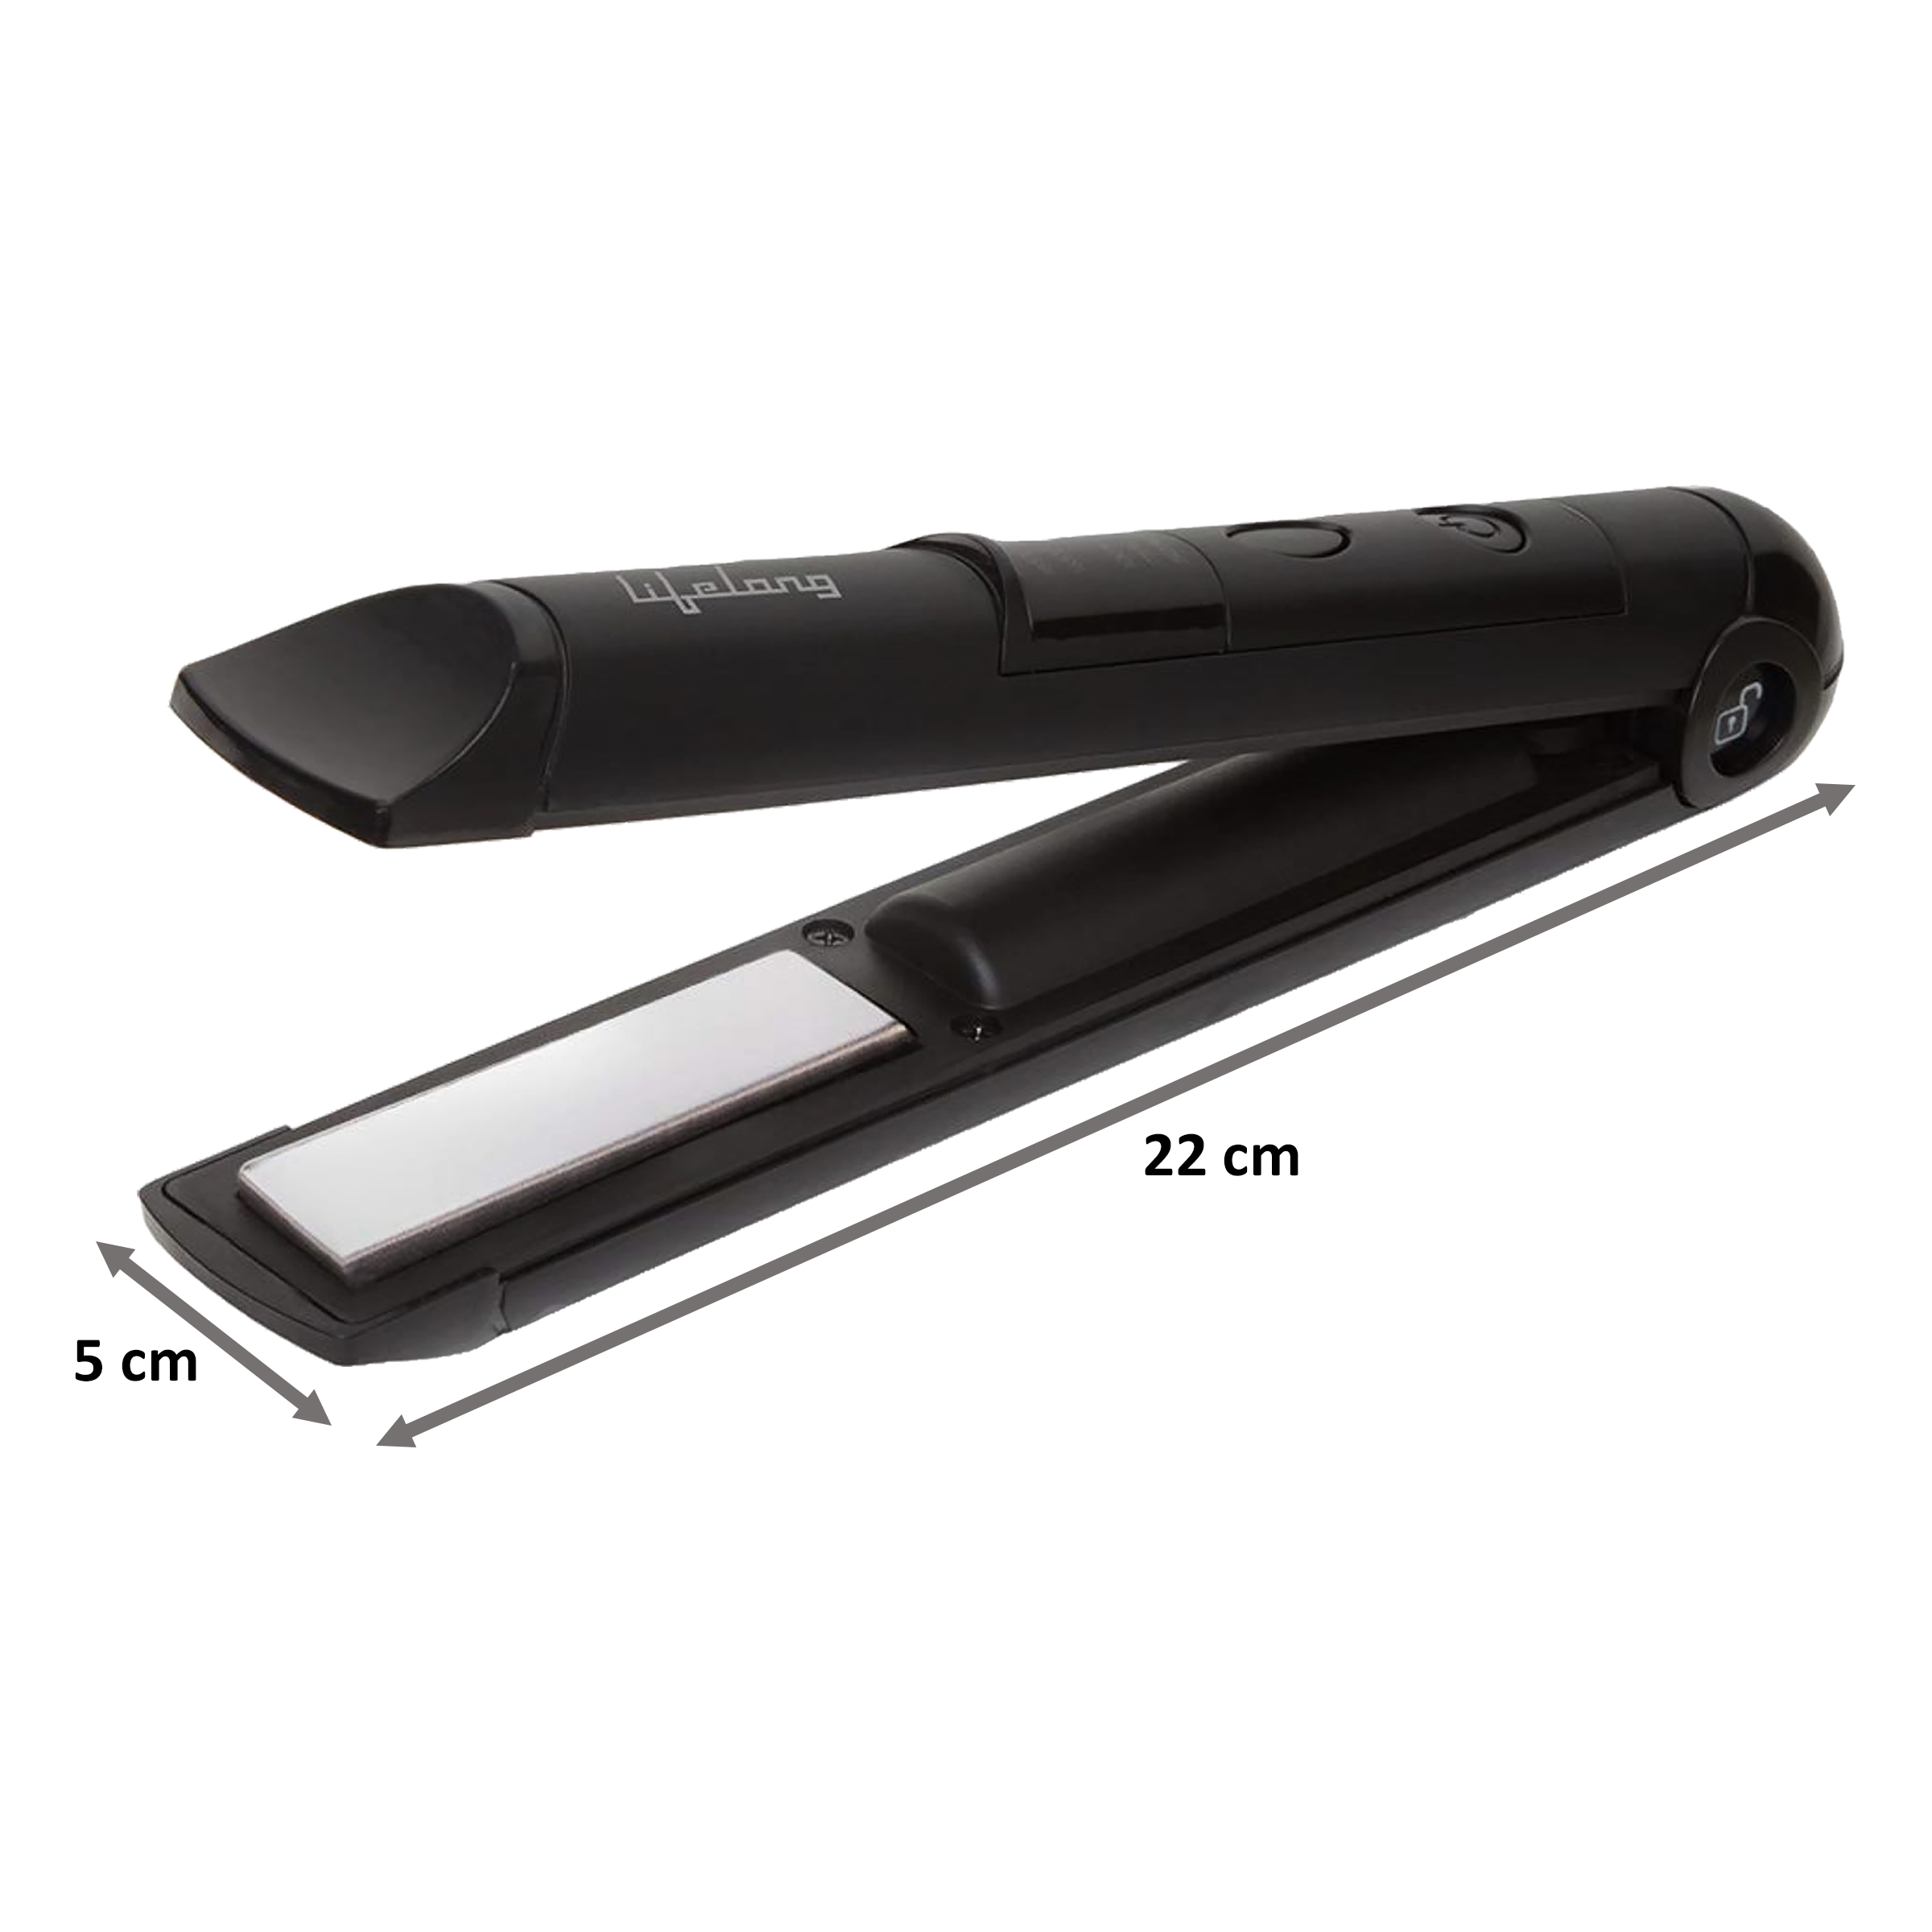 Panasonic Corded Hair Straightener Offer on Croma Price Rs 499  INRDeals